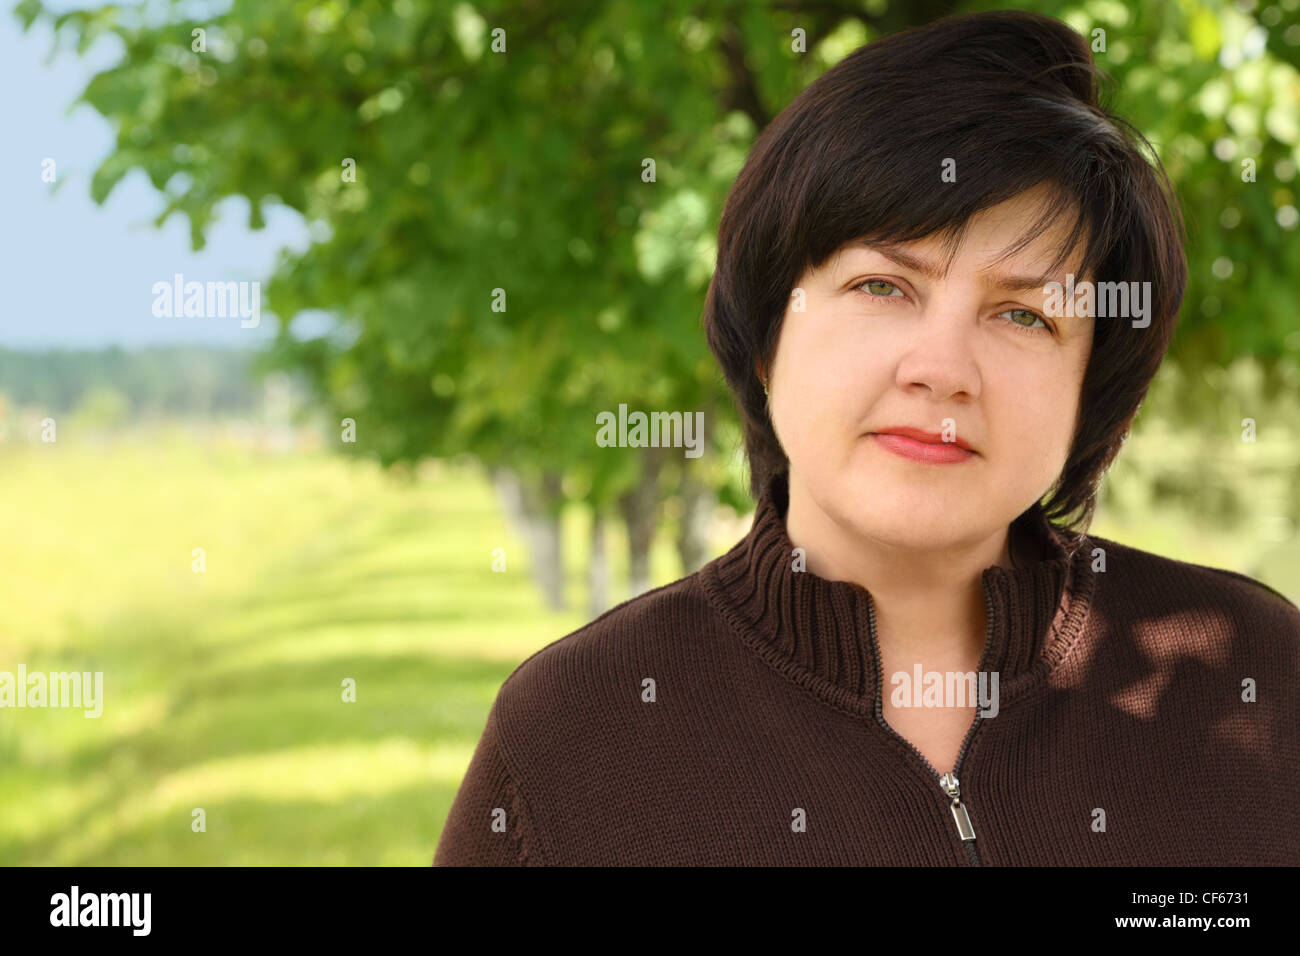 portrait of plumpy adult brunette woman in brown sweater, trees and sky Stock Photo